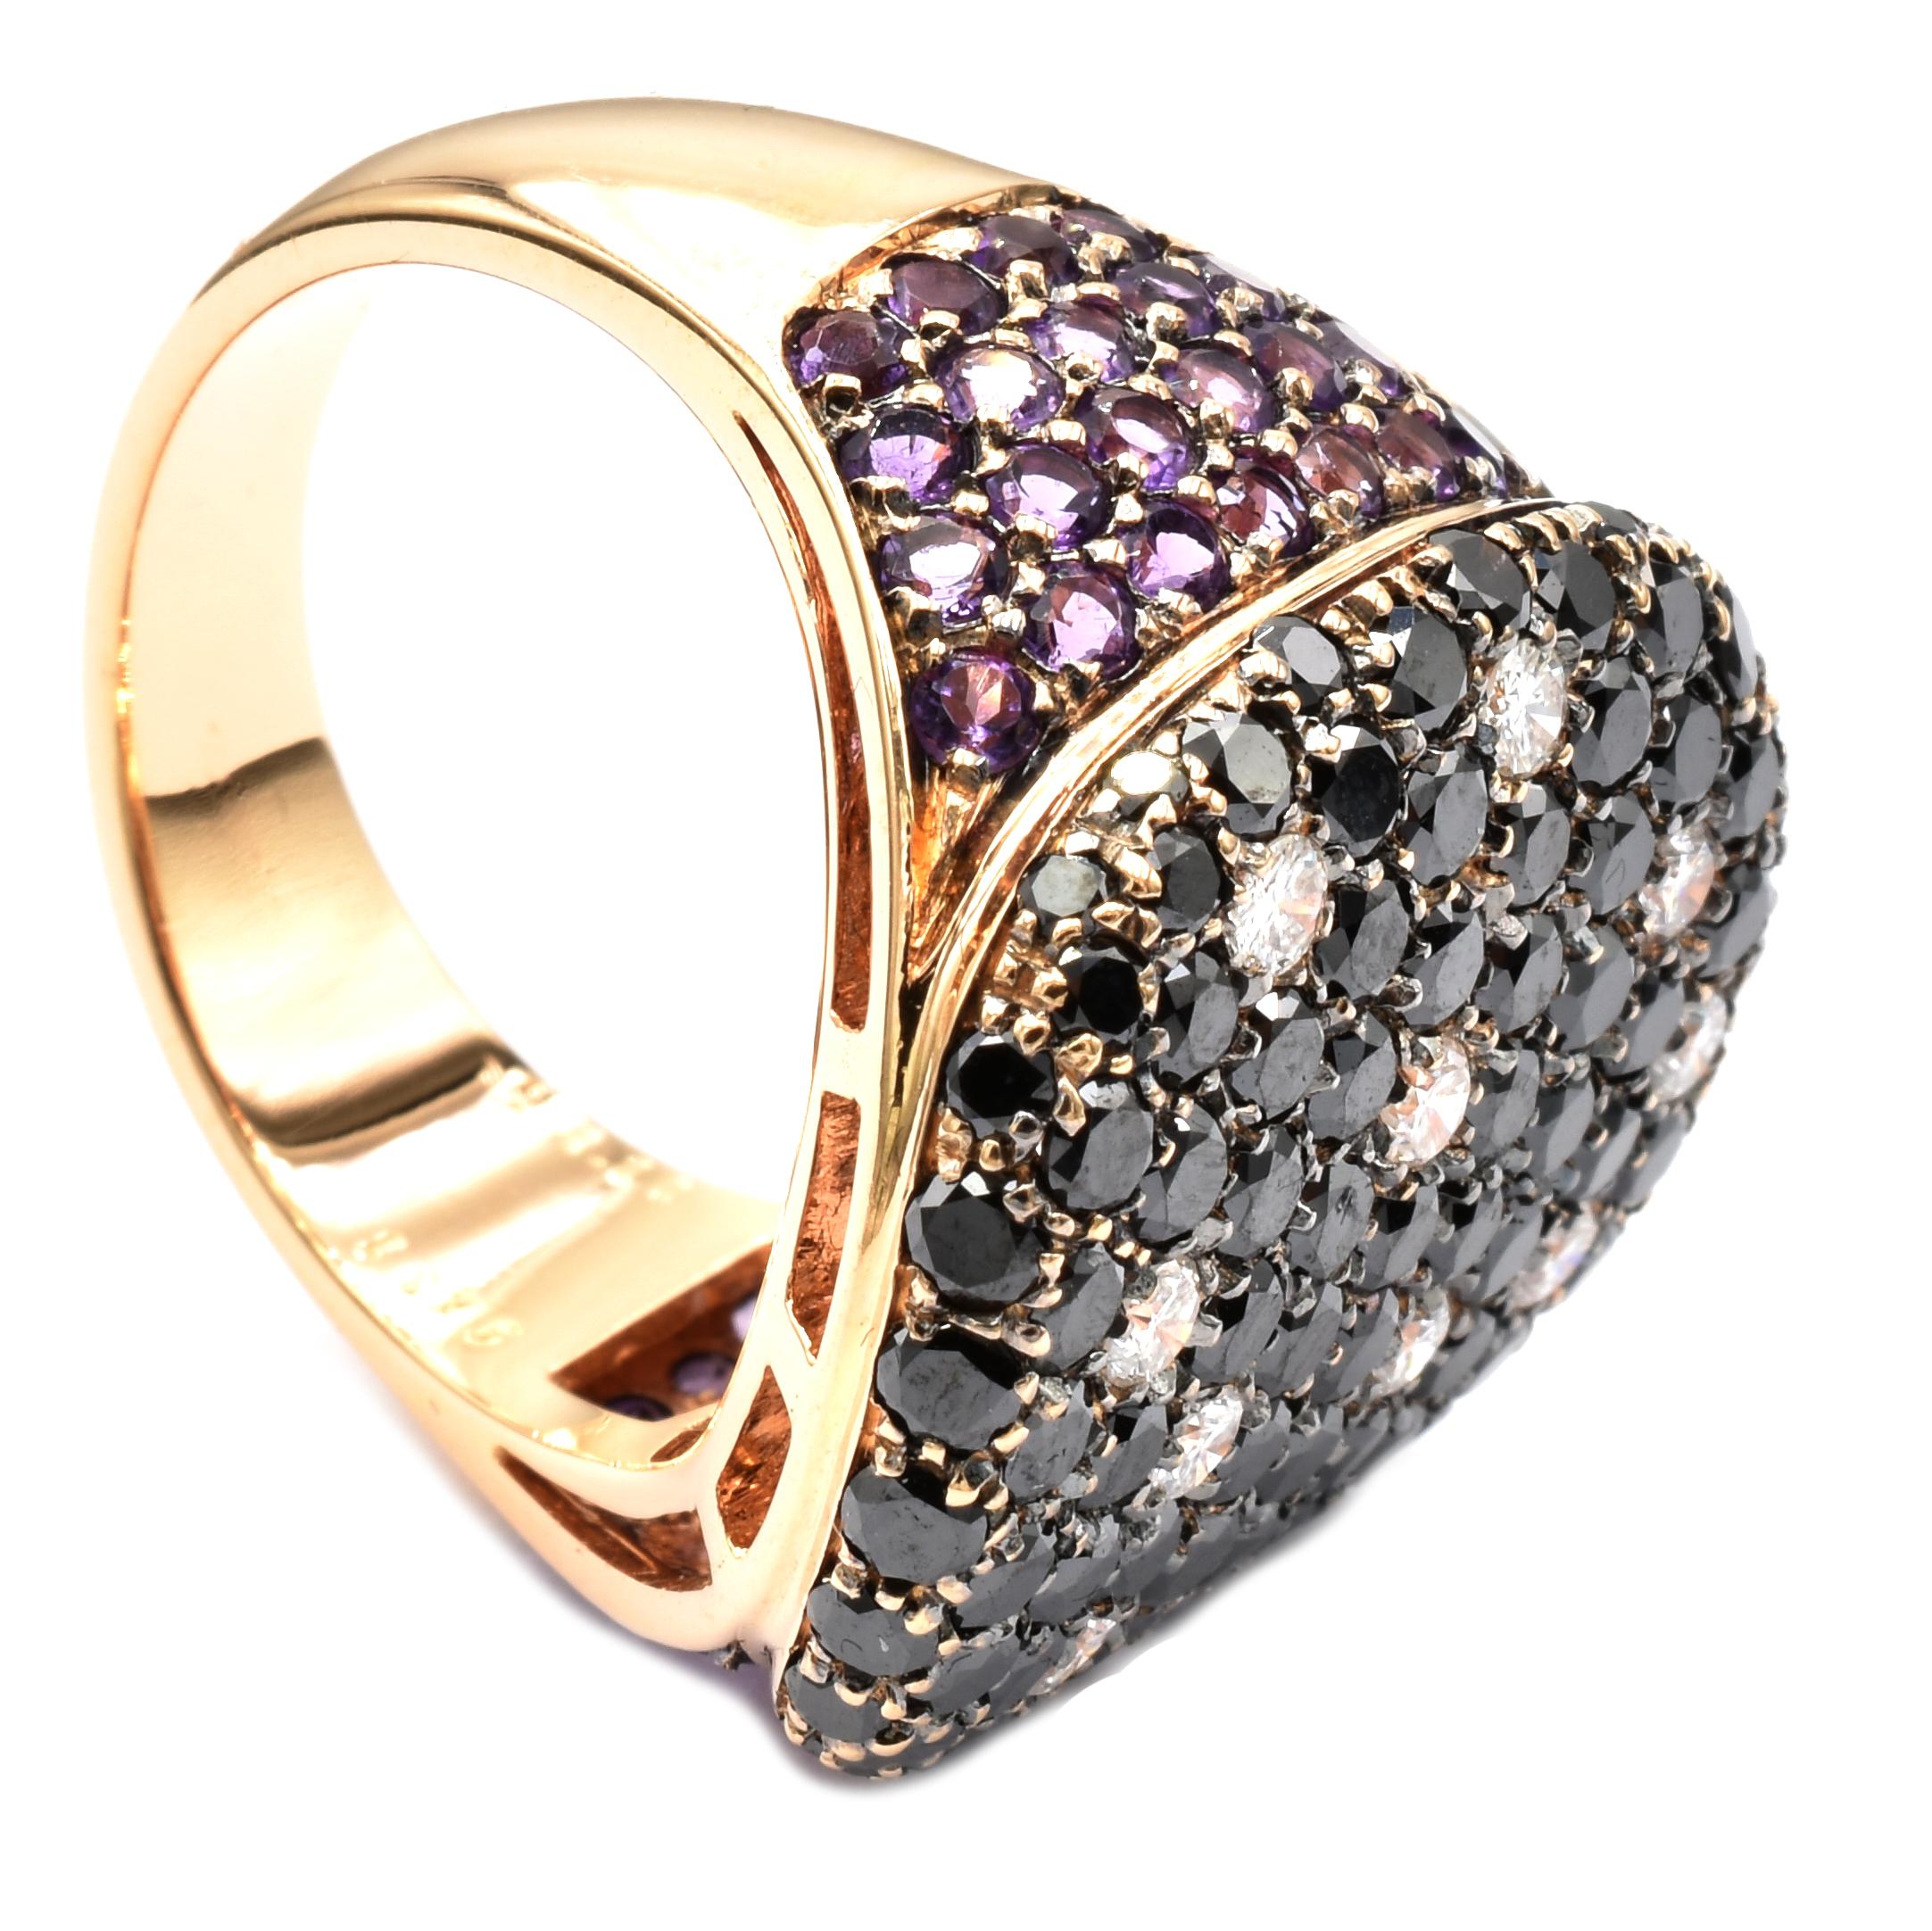 Gilberto Cassola Black Diamonds and Amethyst Rose Gold Ring Made in Italy For Sale 1